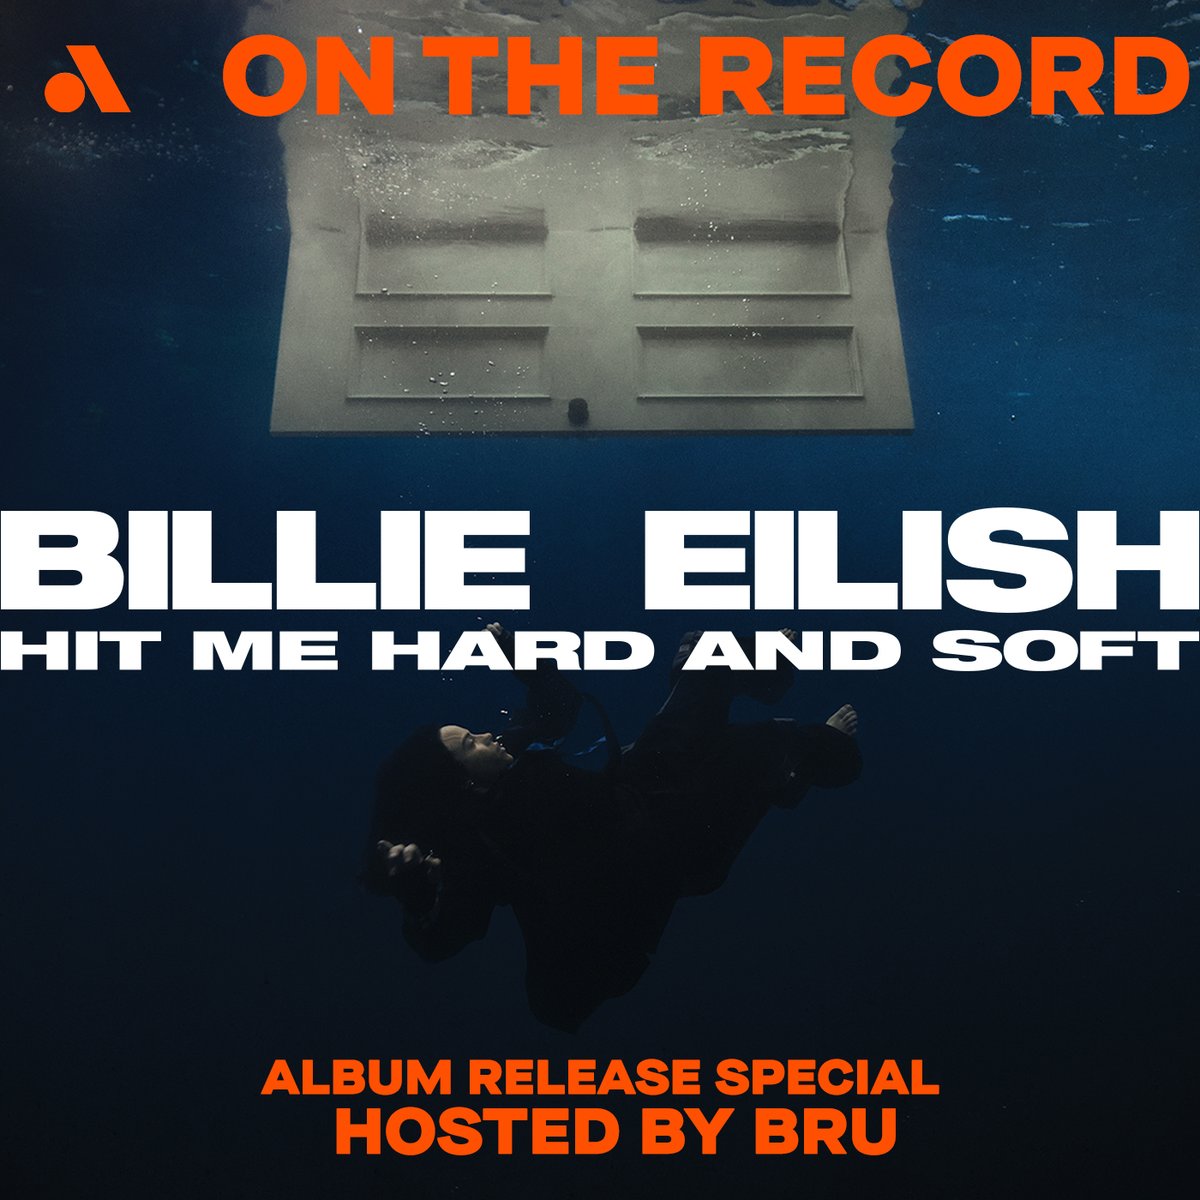 Join us for ‘@BillieEilish: On The Record’ hosted by @BruOnTheRadio 🔥 Tune in for an album release special to share the making of ‘HIT ME HARD AND SOFT,’ the story behind the songs + more on Fri, 5/17 at 9 PM local: auda.cy/BillieOTR